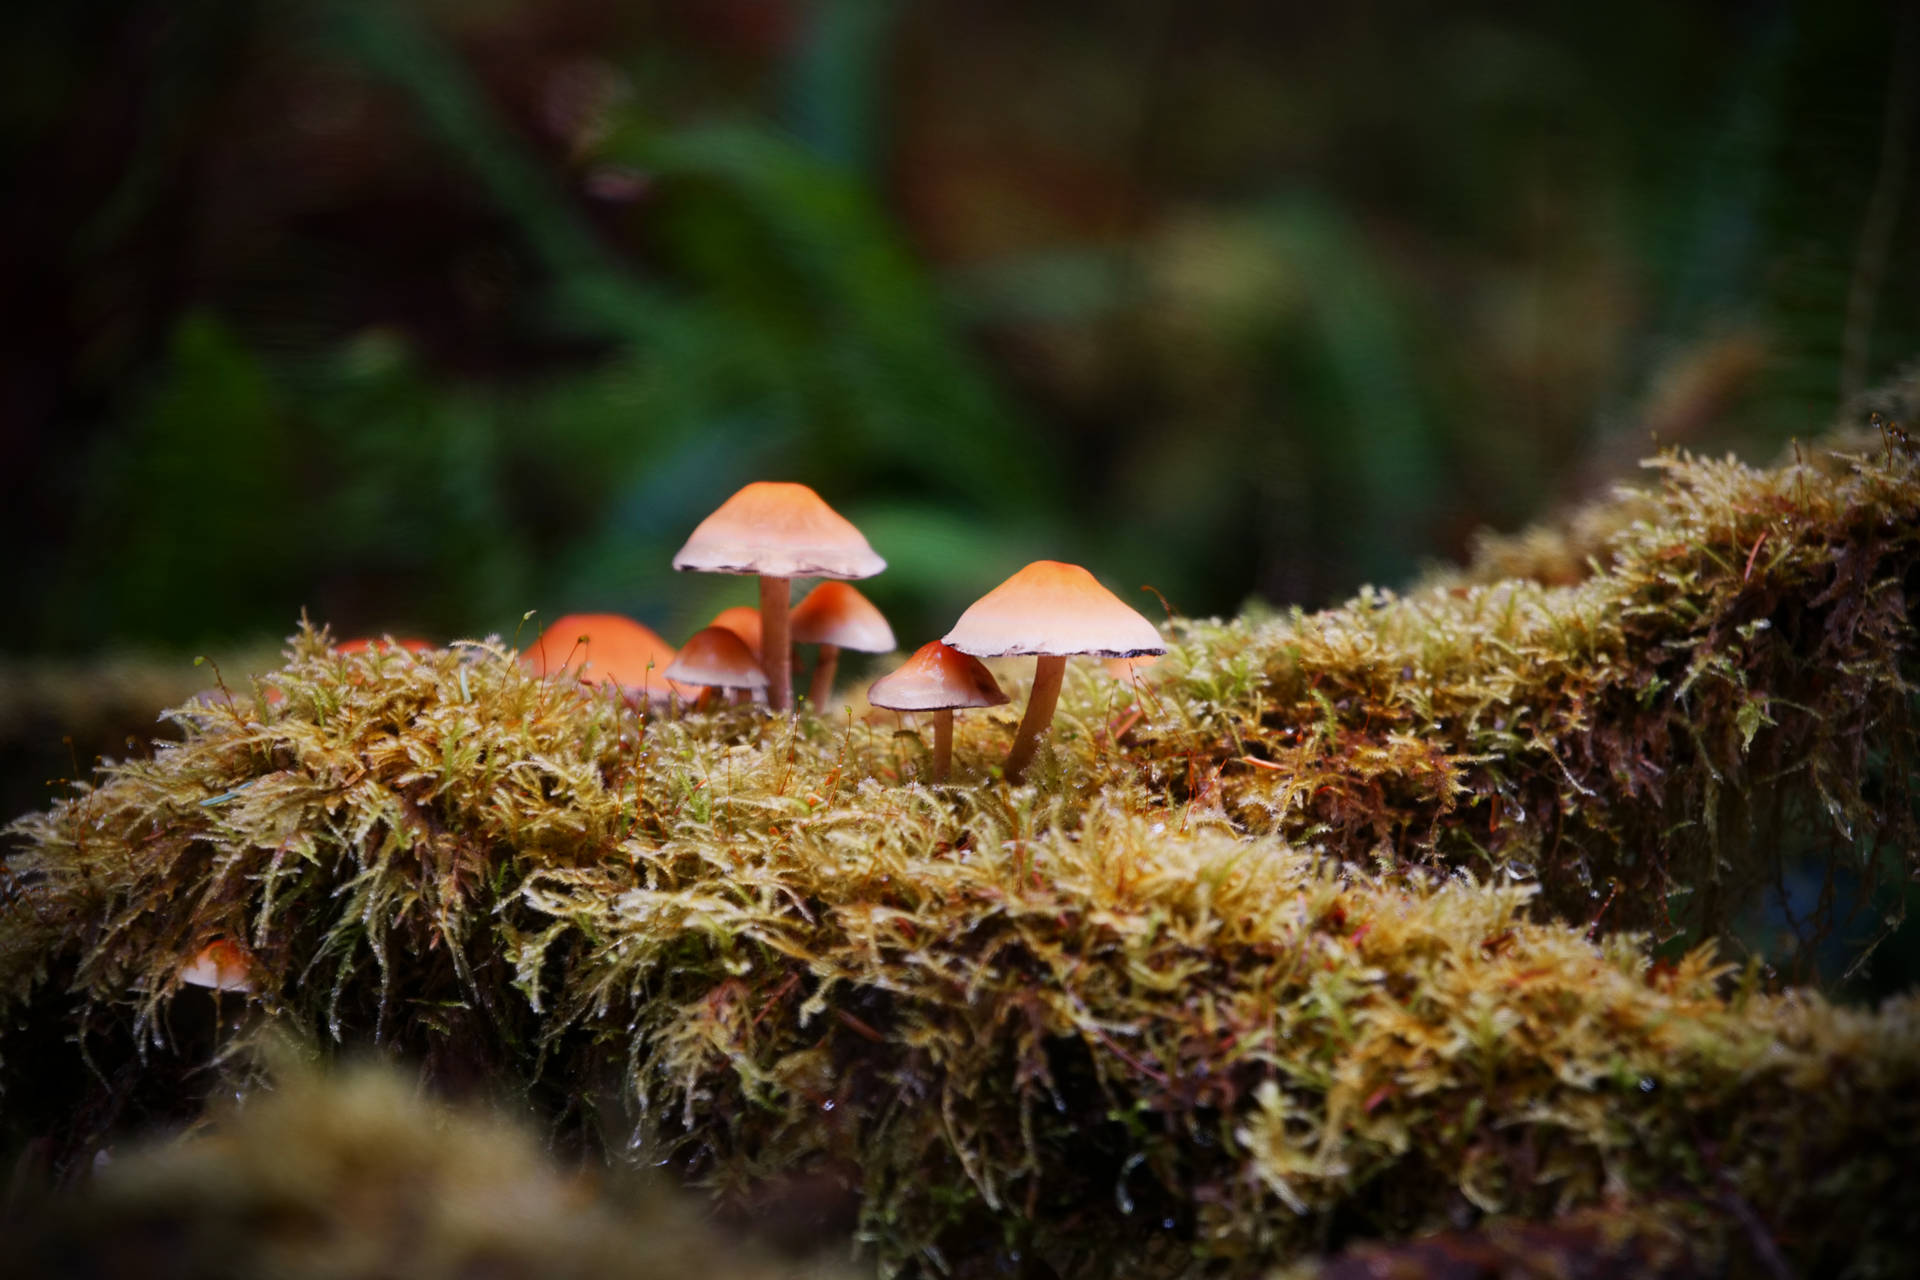 Fantastical Umbrella Shaped Mushroom Emerges From The Forest Floor